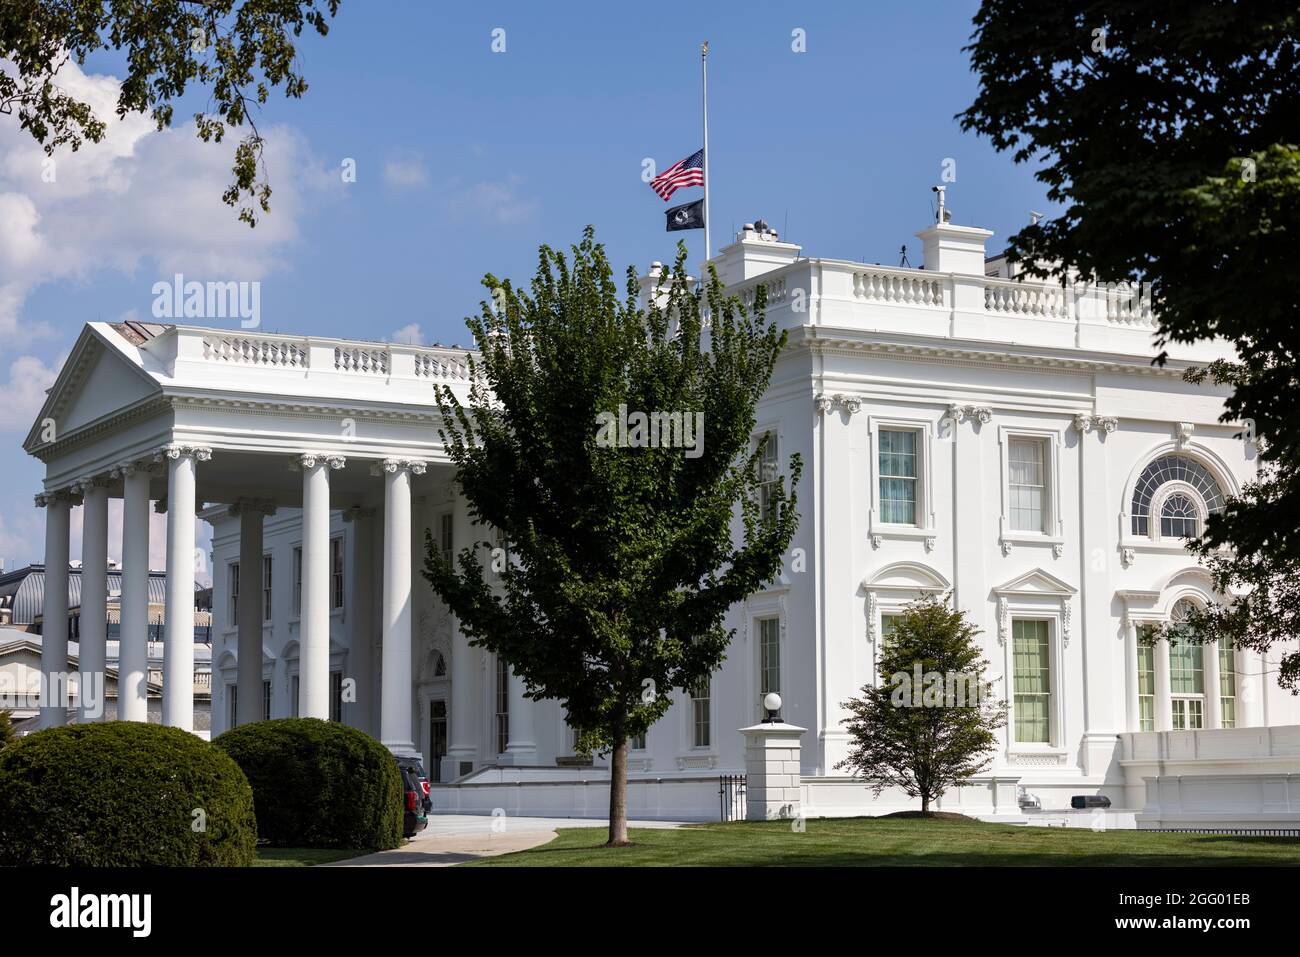 The US flag flies at half-staff above the White House in Washington, DC, USA. 27th Aug, 2021. A suicide bomber from ISIS-K killed more than 100 people, including 13 US troops, outside Hamid Karzai International Airport in Kabul, Afghanistan on 26 August. Credit: Sipa USA/Alamy Live News Stock Photo